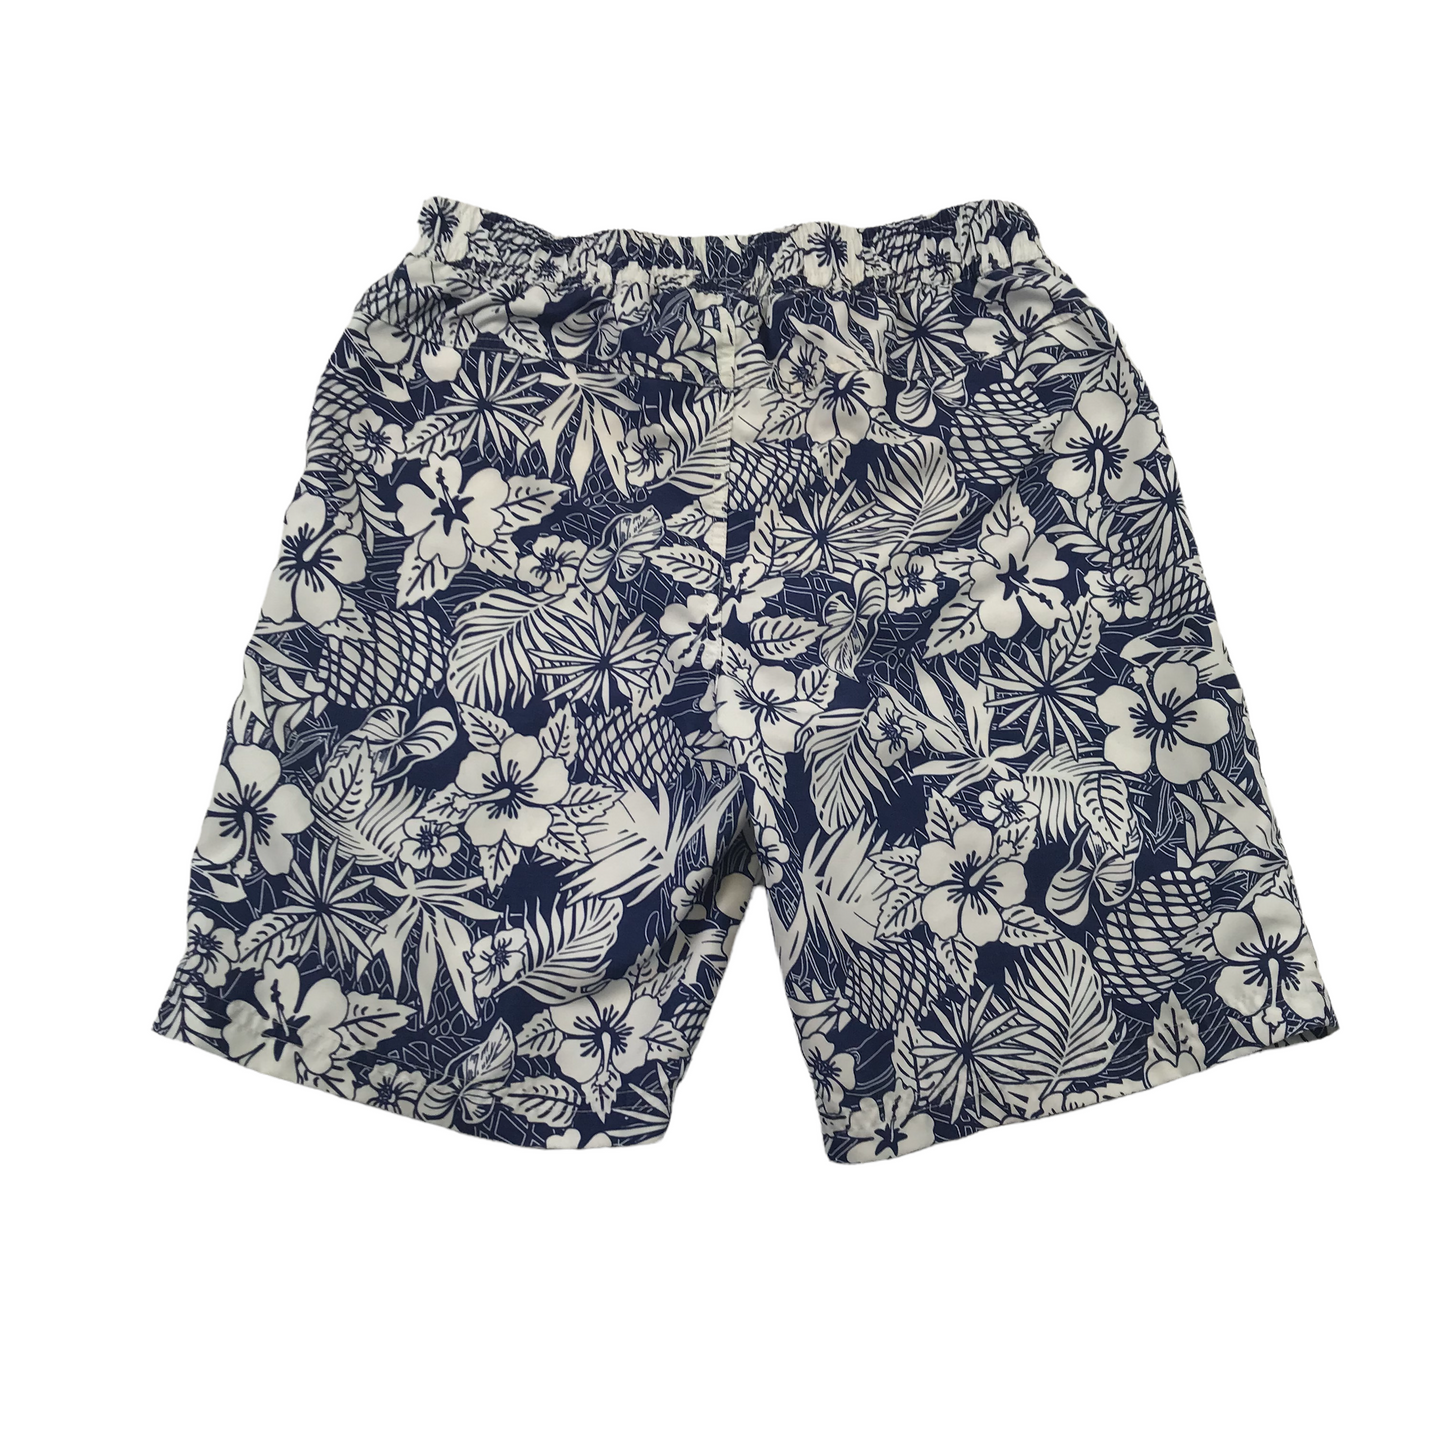 Bluezoo Navy Blue and White Floral Swim Trunks Age 8